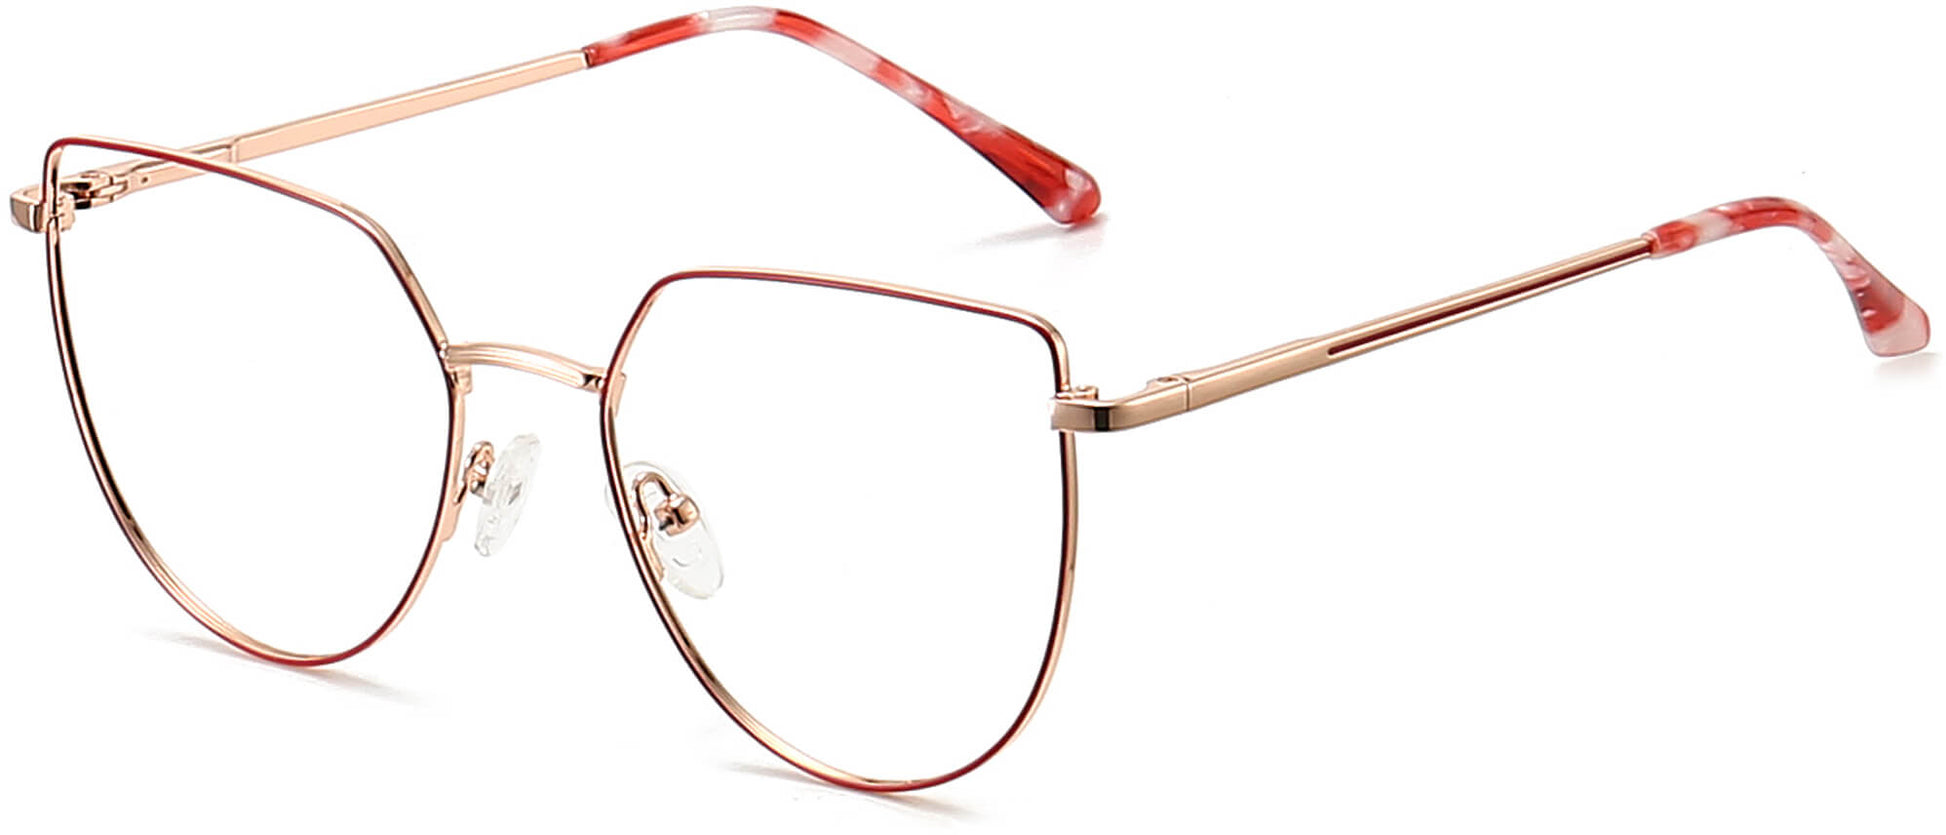 Katie Cateye Red Eyeglasses from ANRRI, angle view